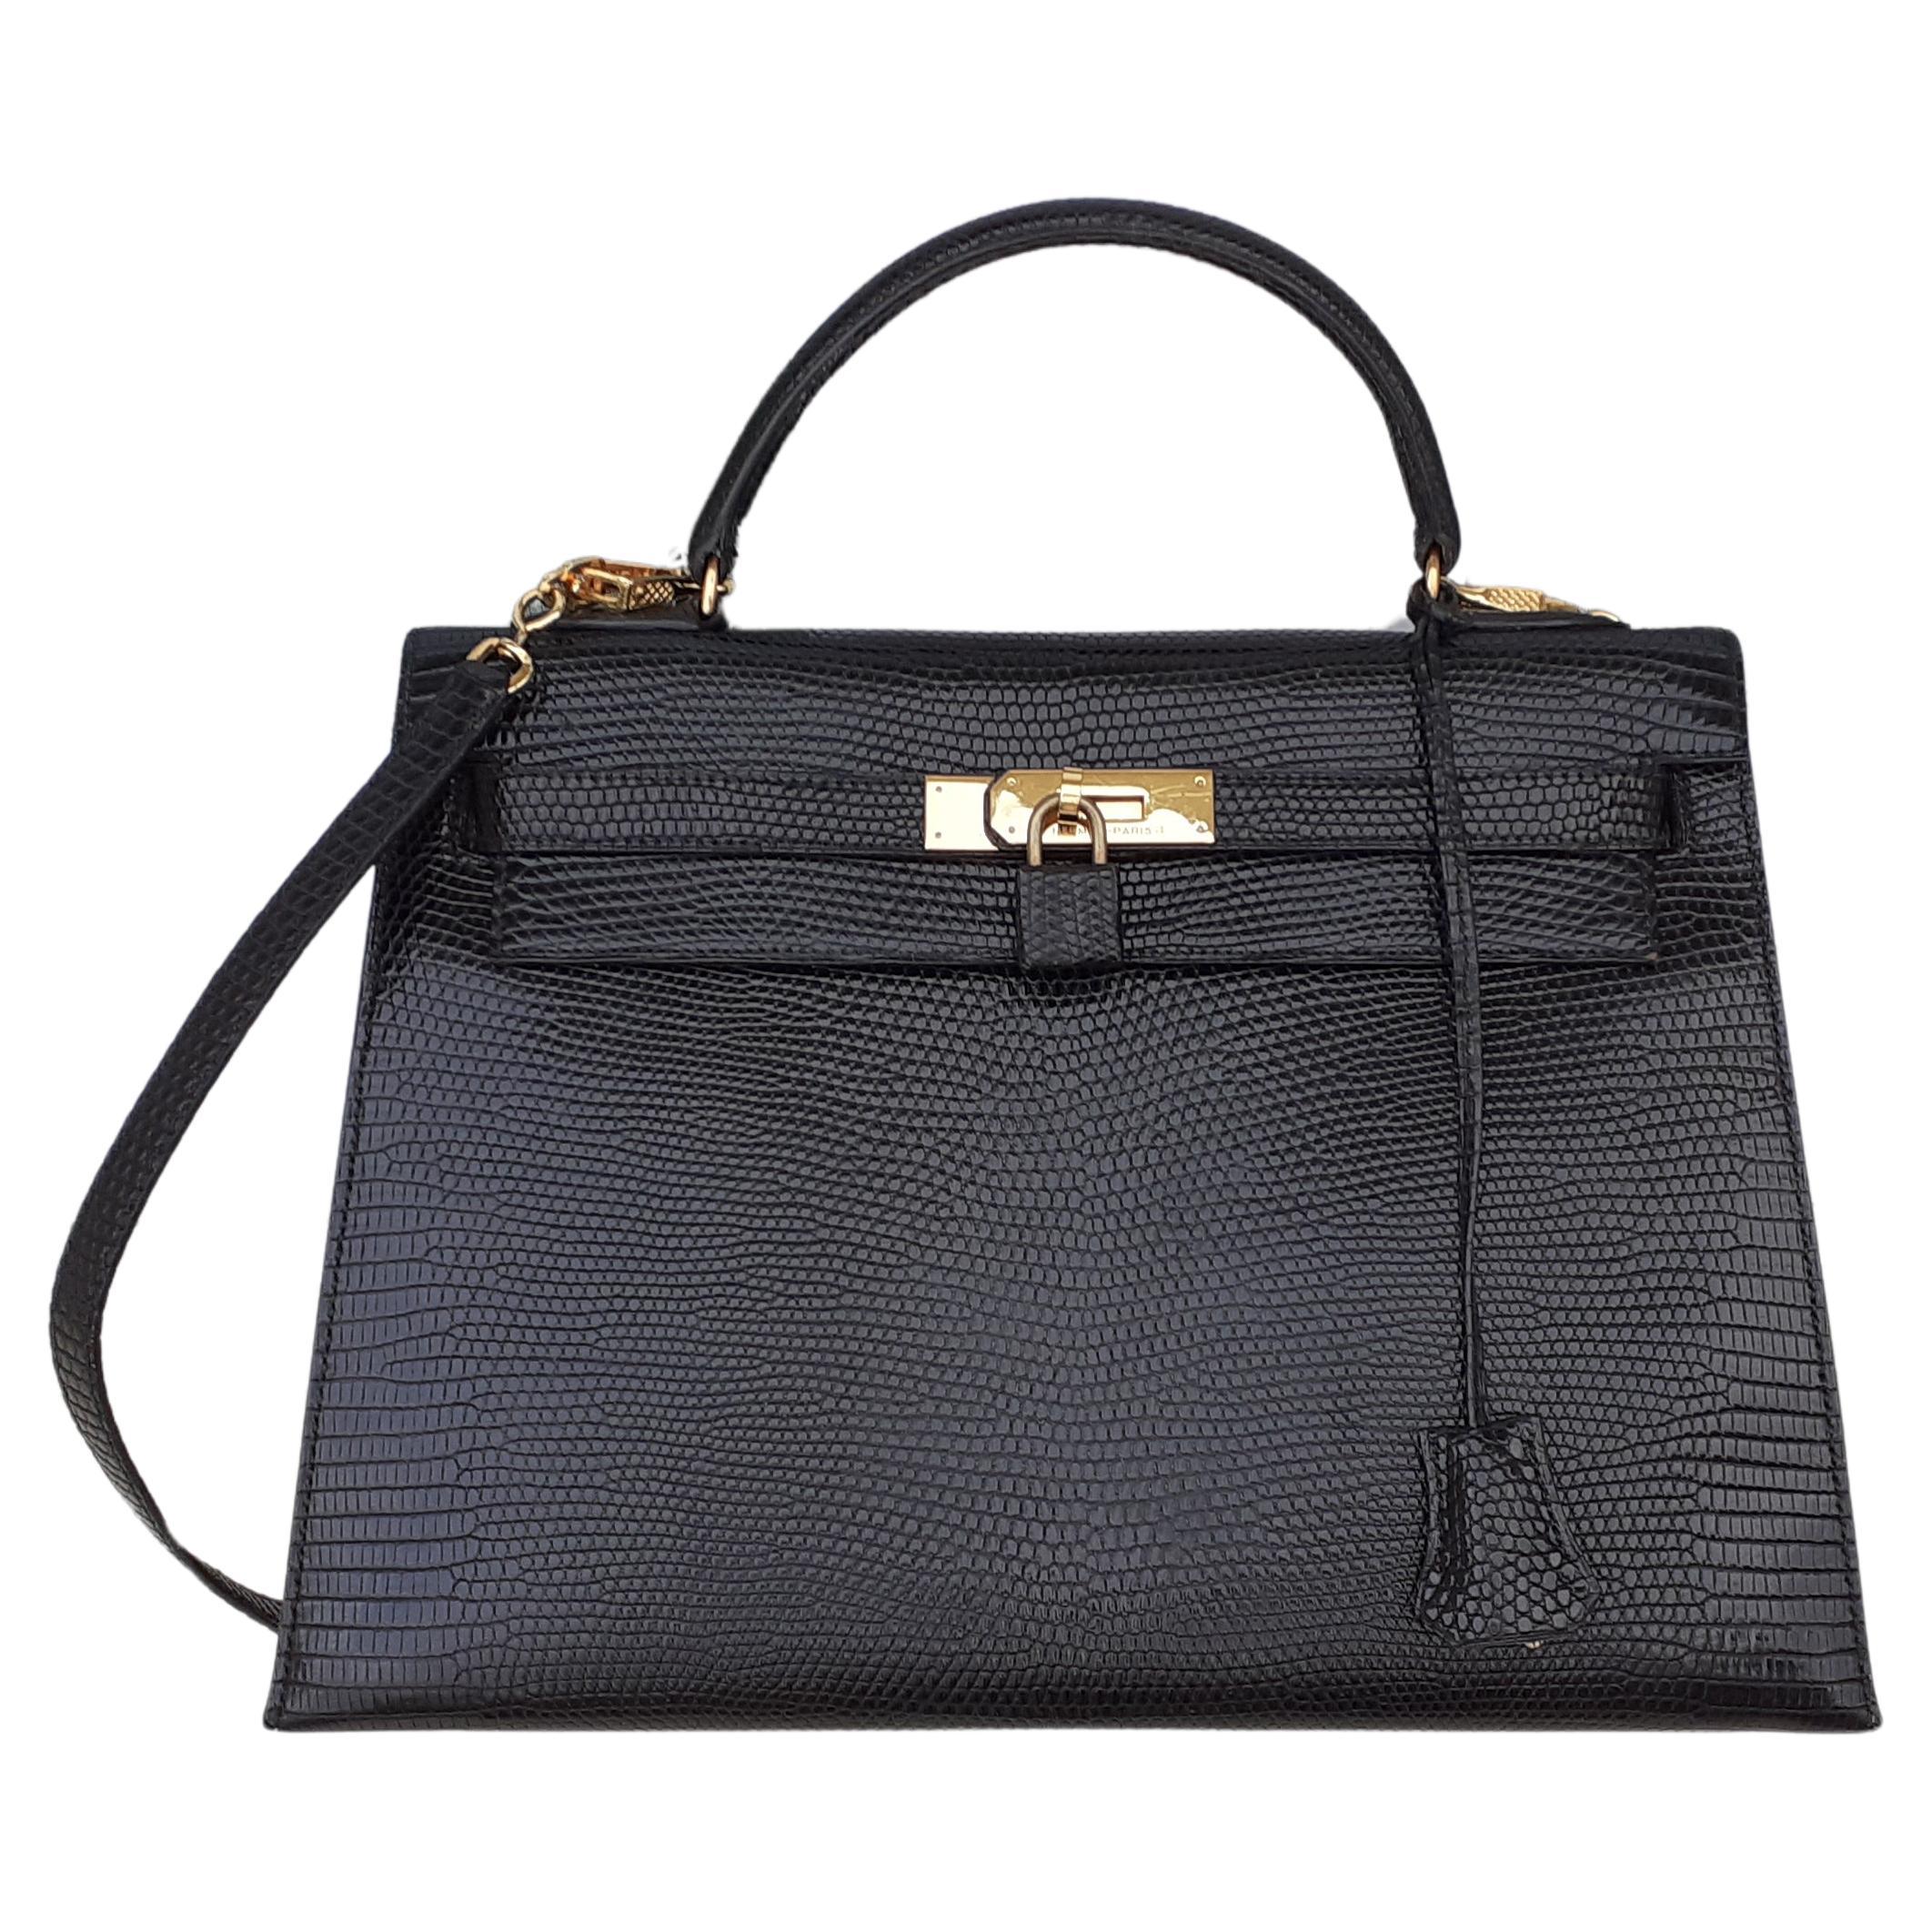 Exceptional Hermès Sellier Kelly Bag Black Lizard and Golden Hdw RARE For Sale